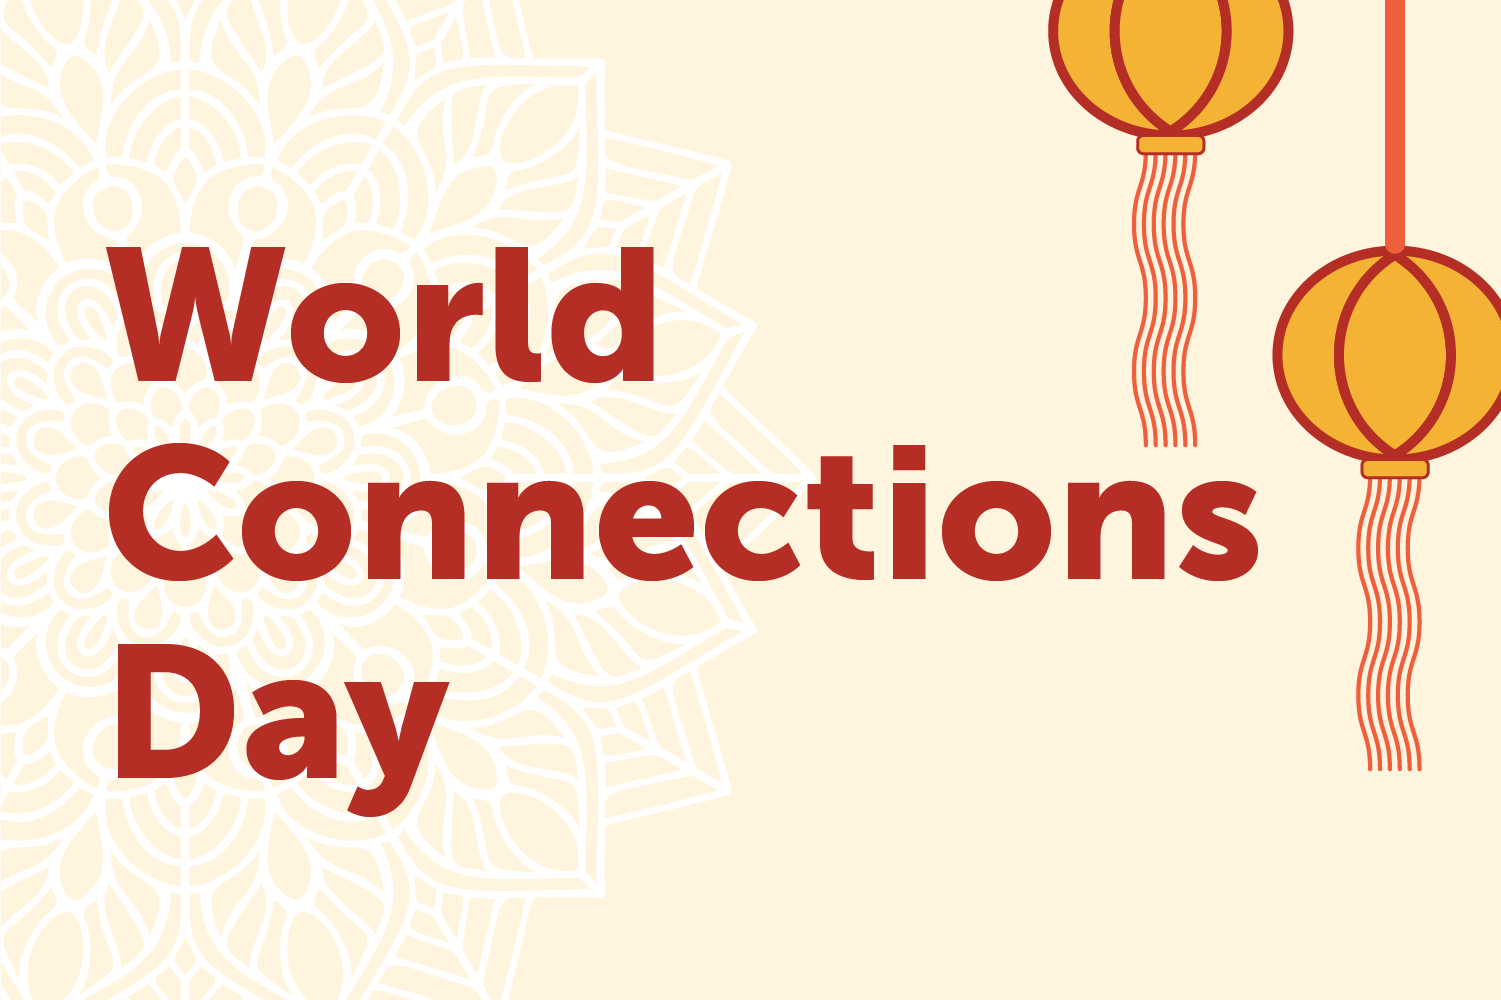 World Connections Day